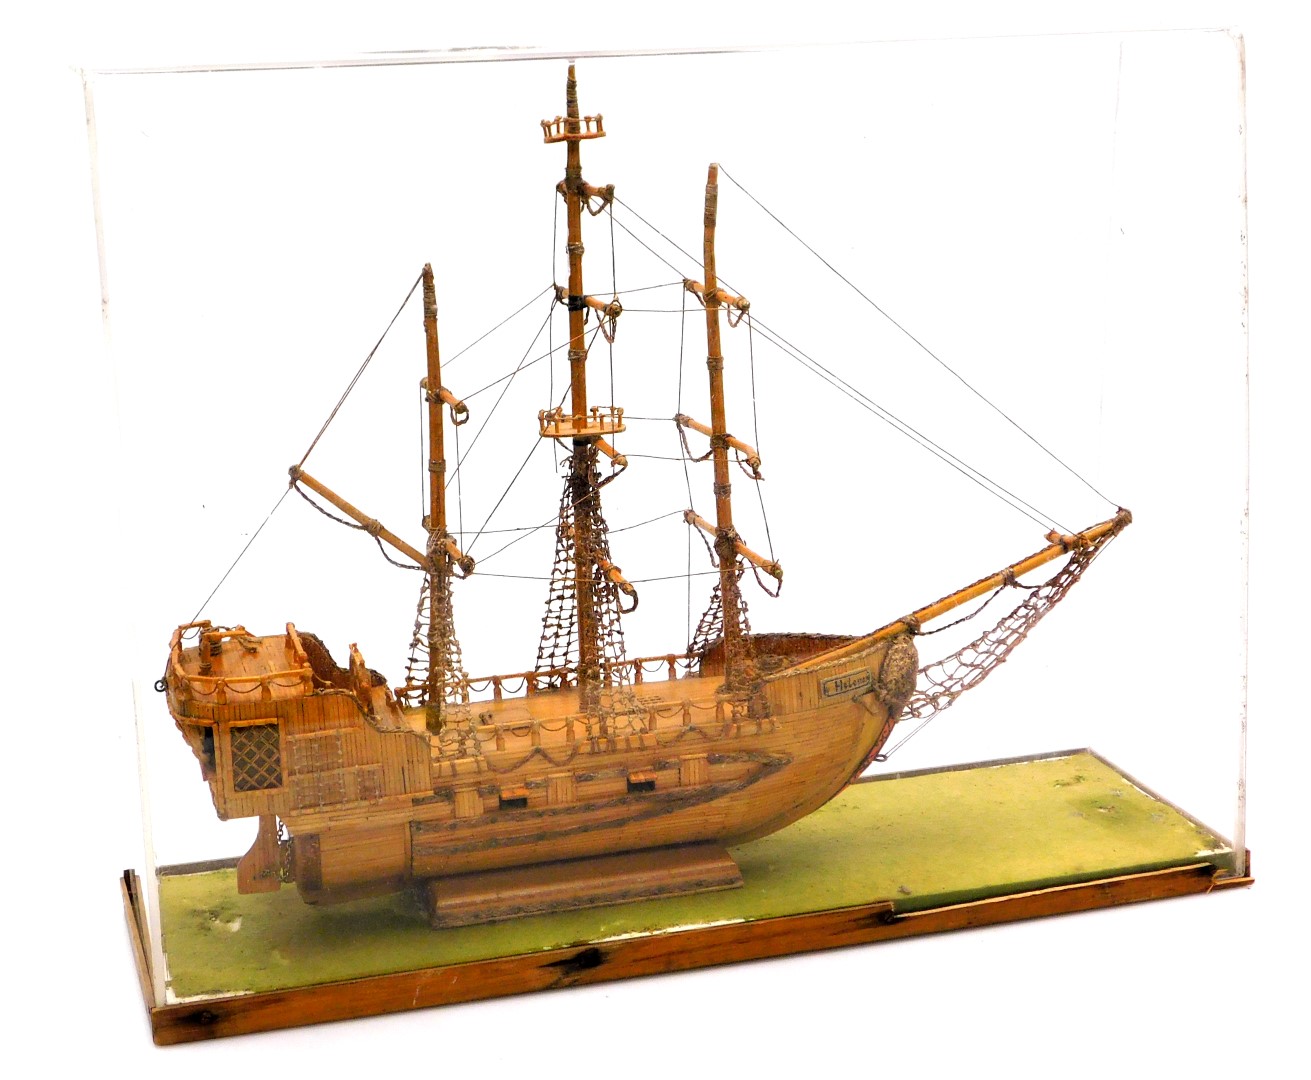 A vintage matchstick model of the sloop HMS Helena, formerly HMS Atalanta, fourteen gun, in a perspe